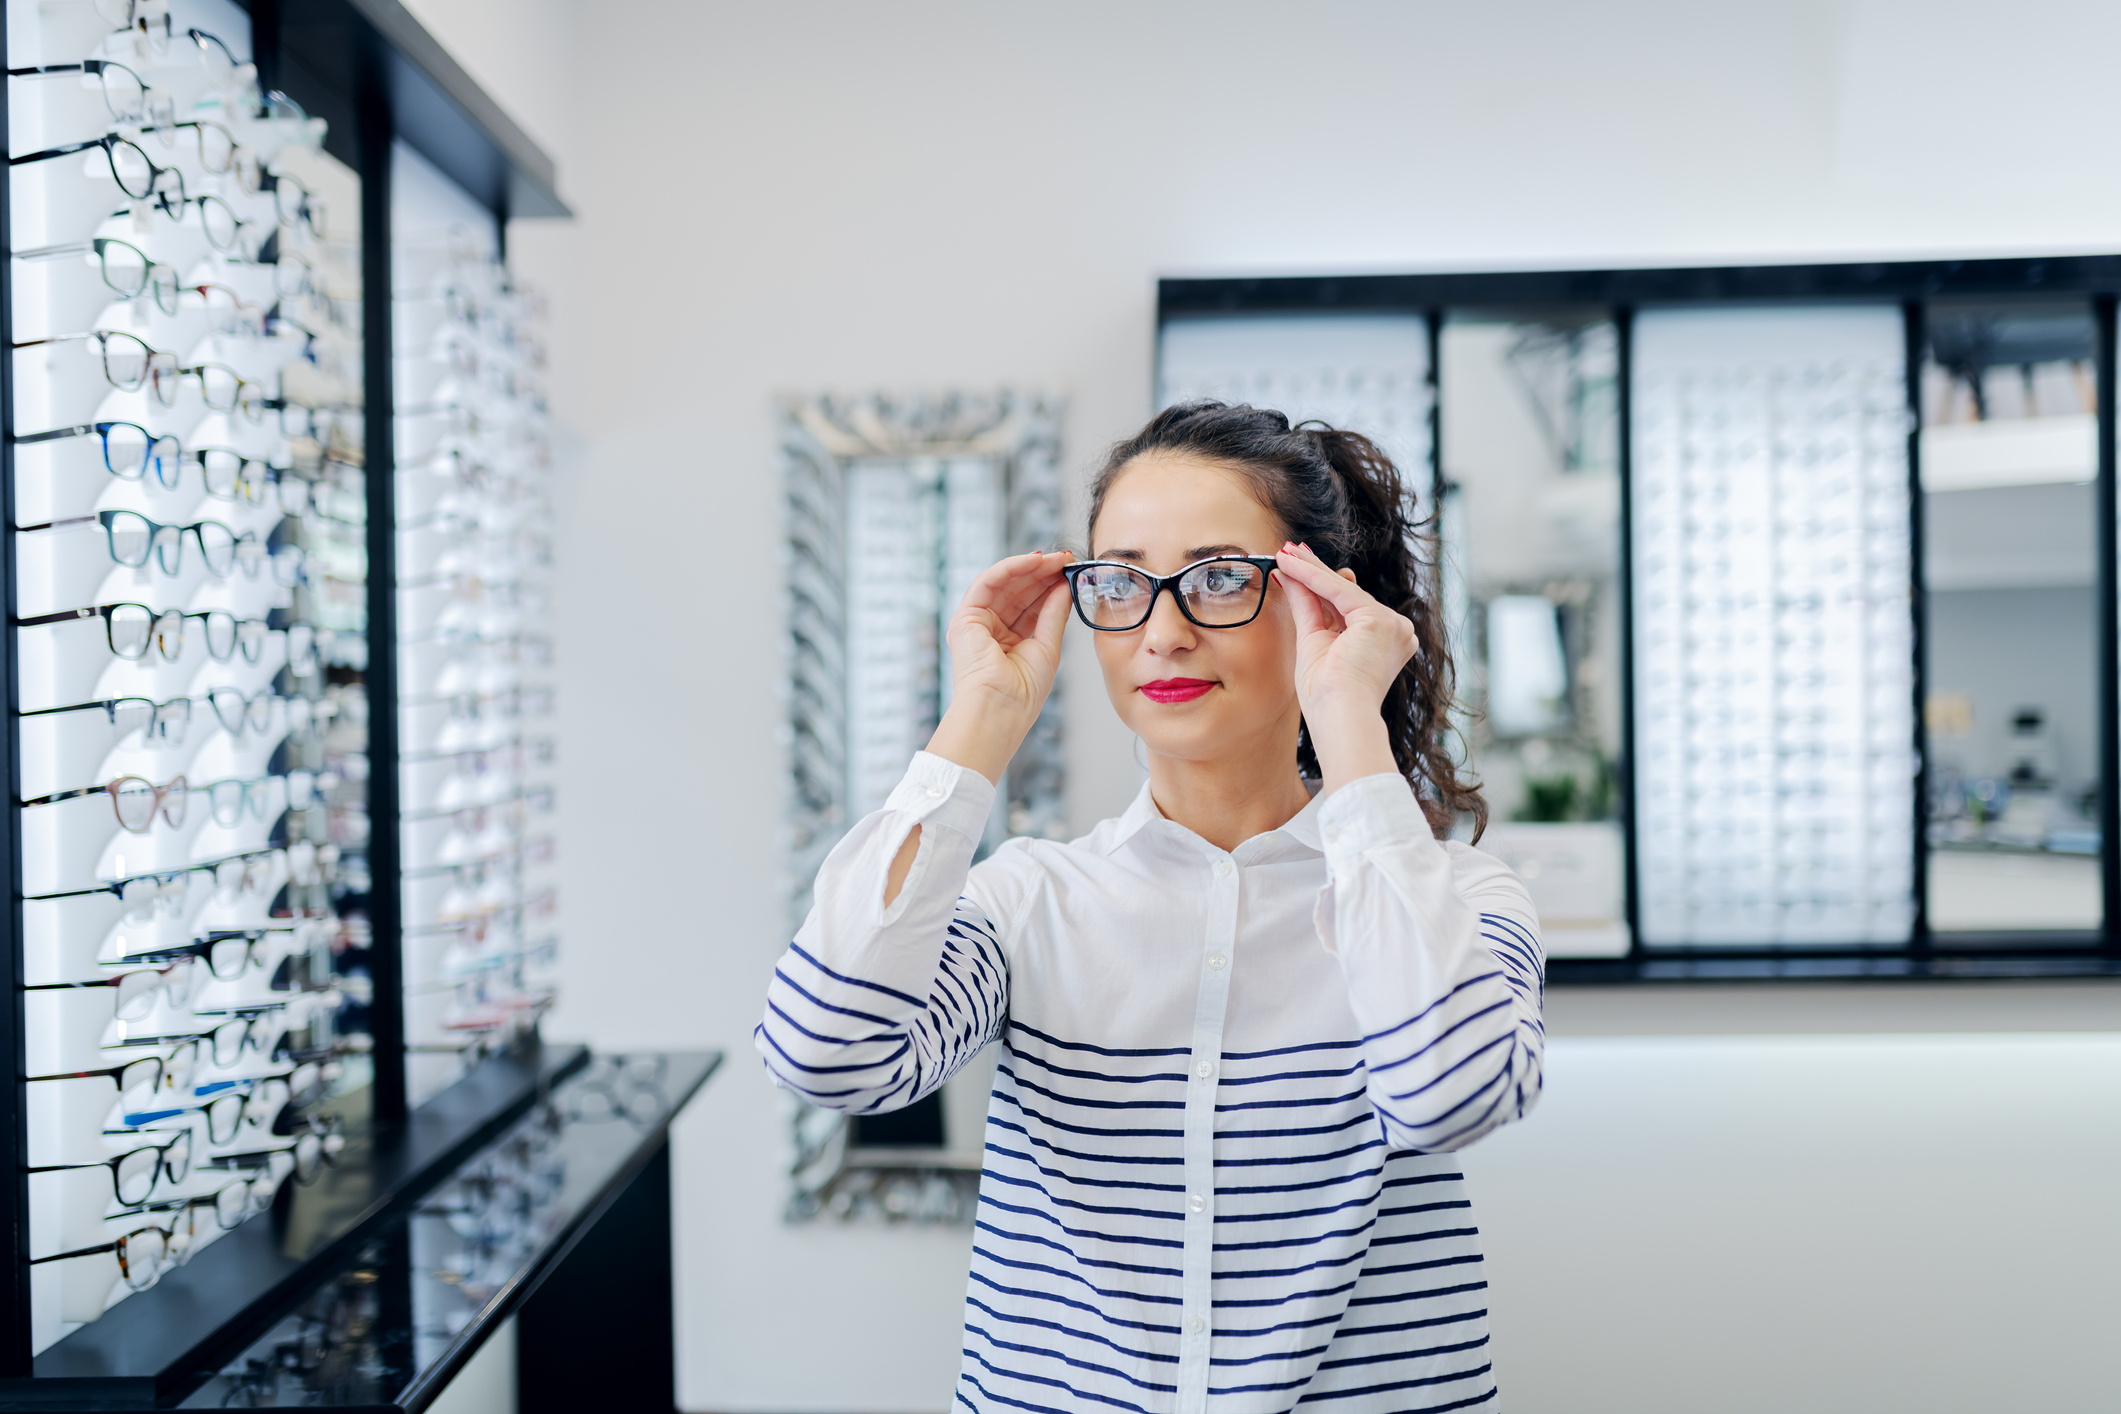 A woman trying on pairs of glasses in a glasses shop.